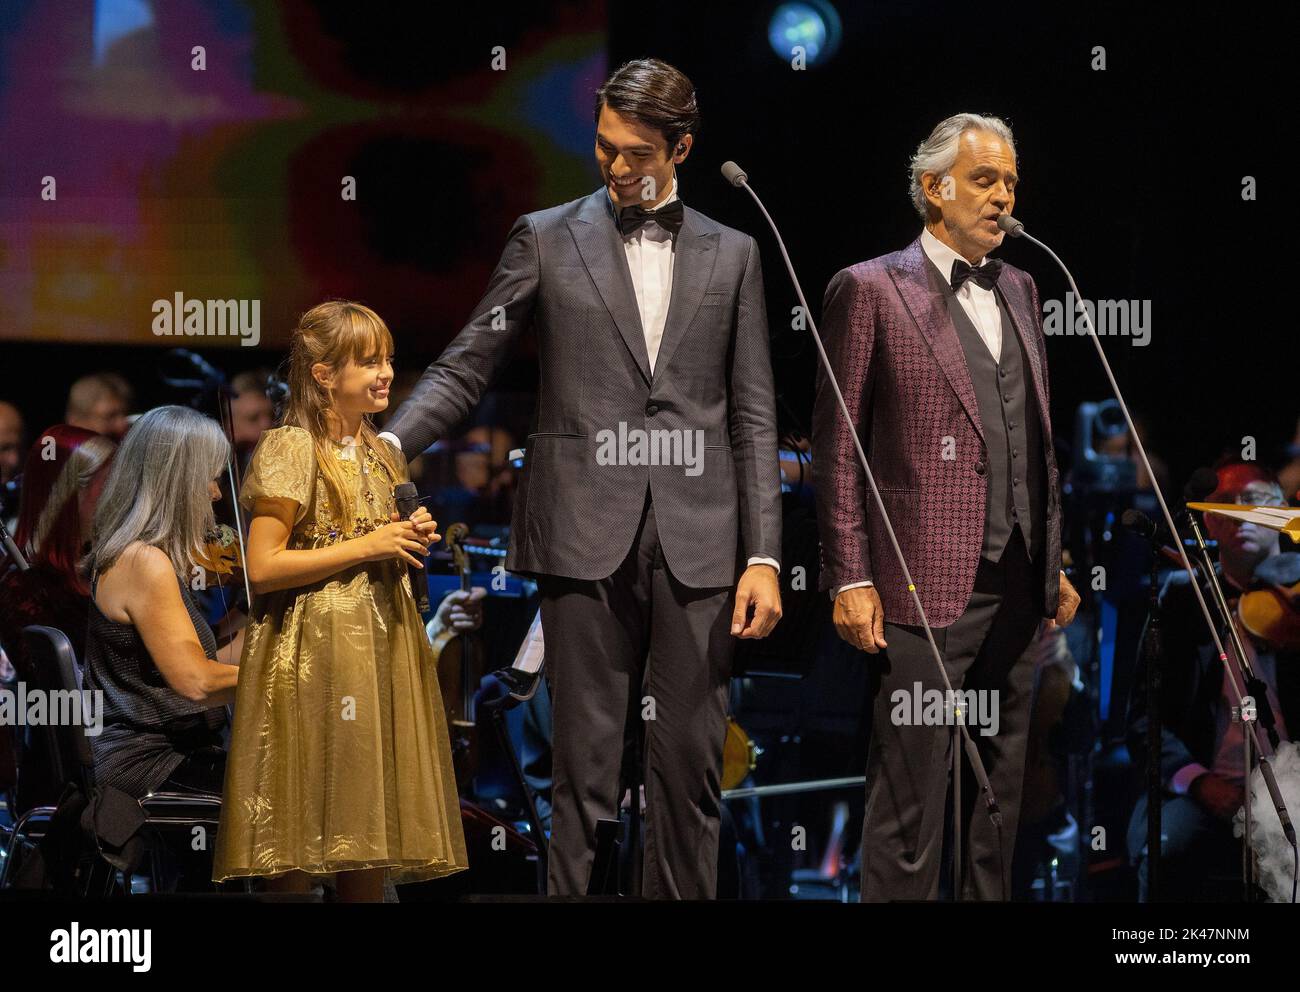 Andrea Bocelli: Son Matteo sings in Rome's Colosseum at 19 as proud brother  Amos watches, Music, Entertainment